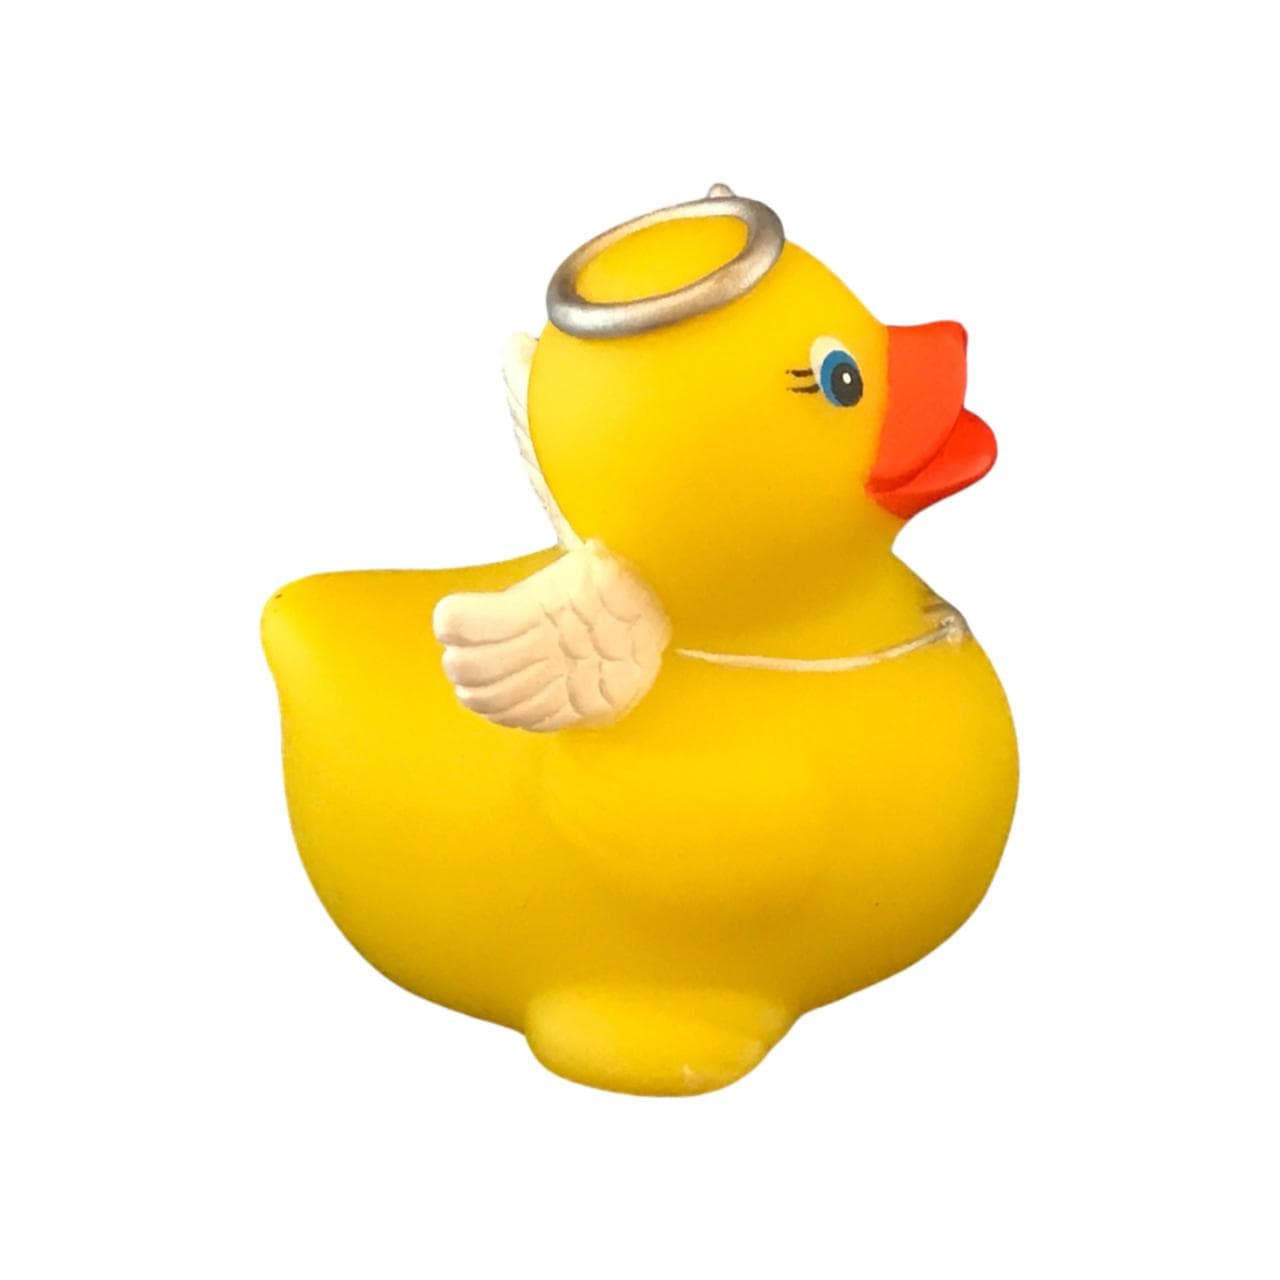 Angel Rubber Duck from Lanco - $10.99 : Ducks Only!, Exclusively Ducks